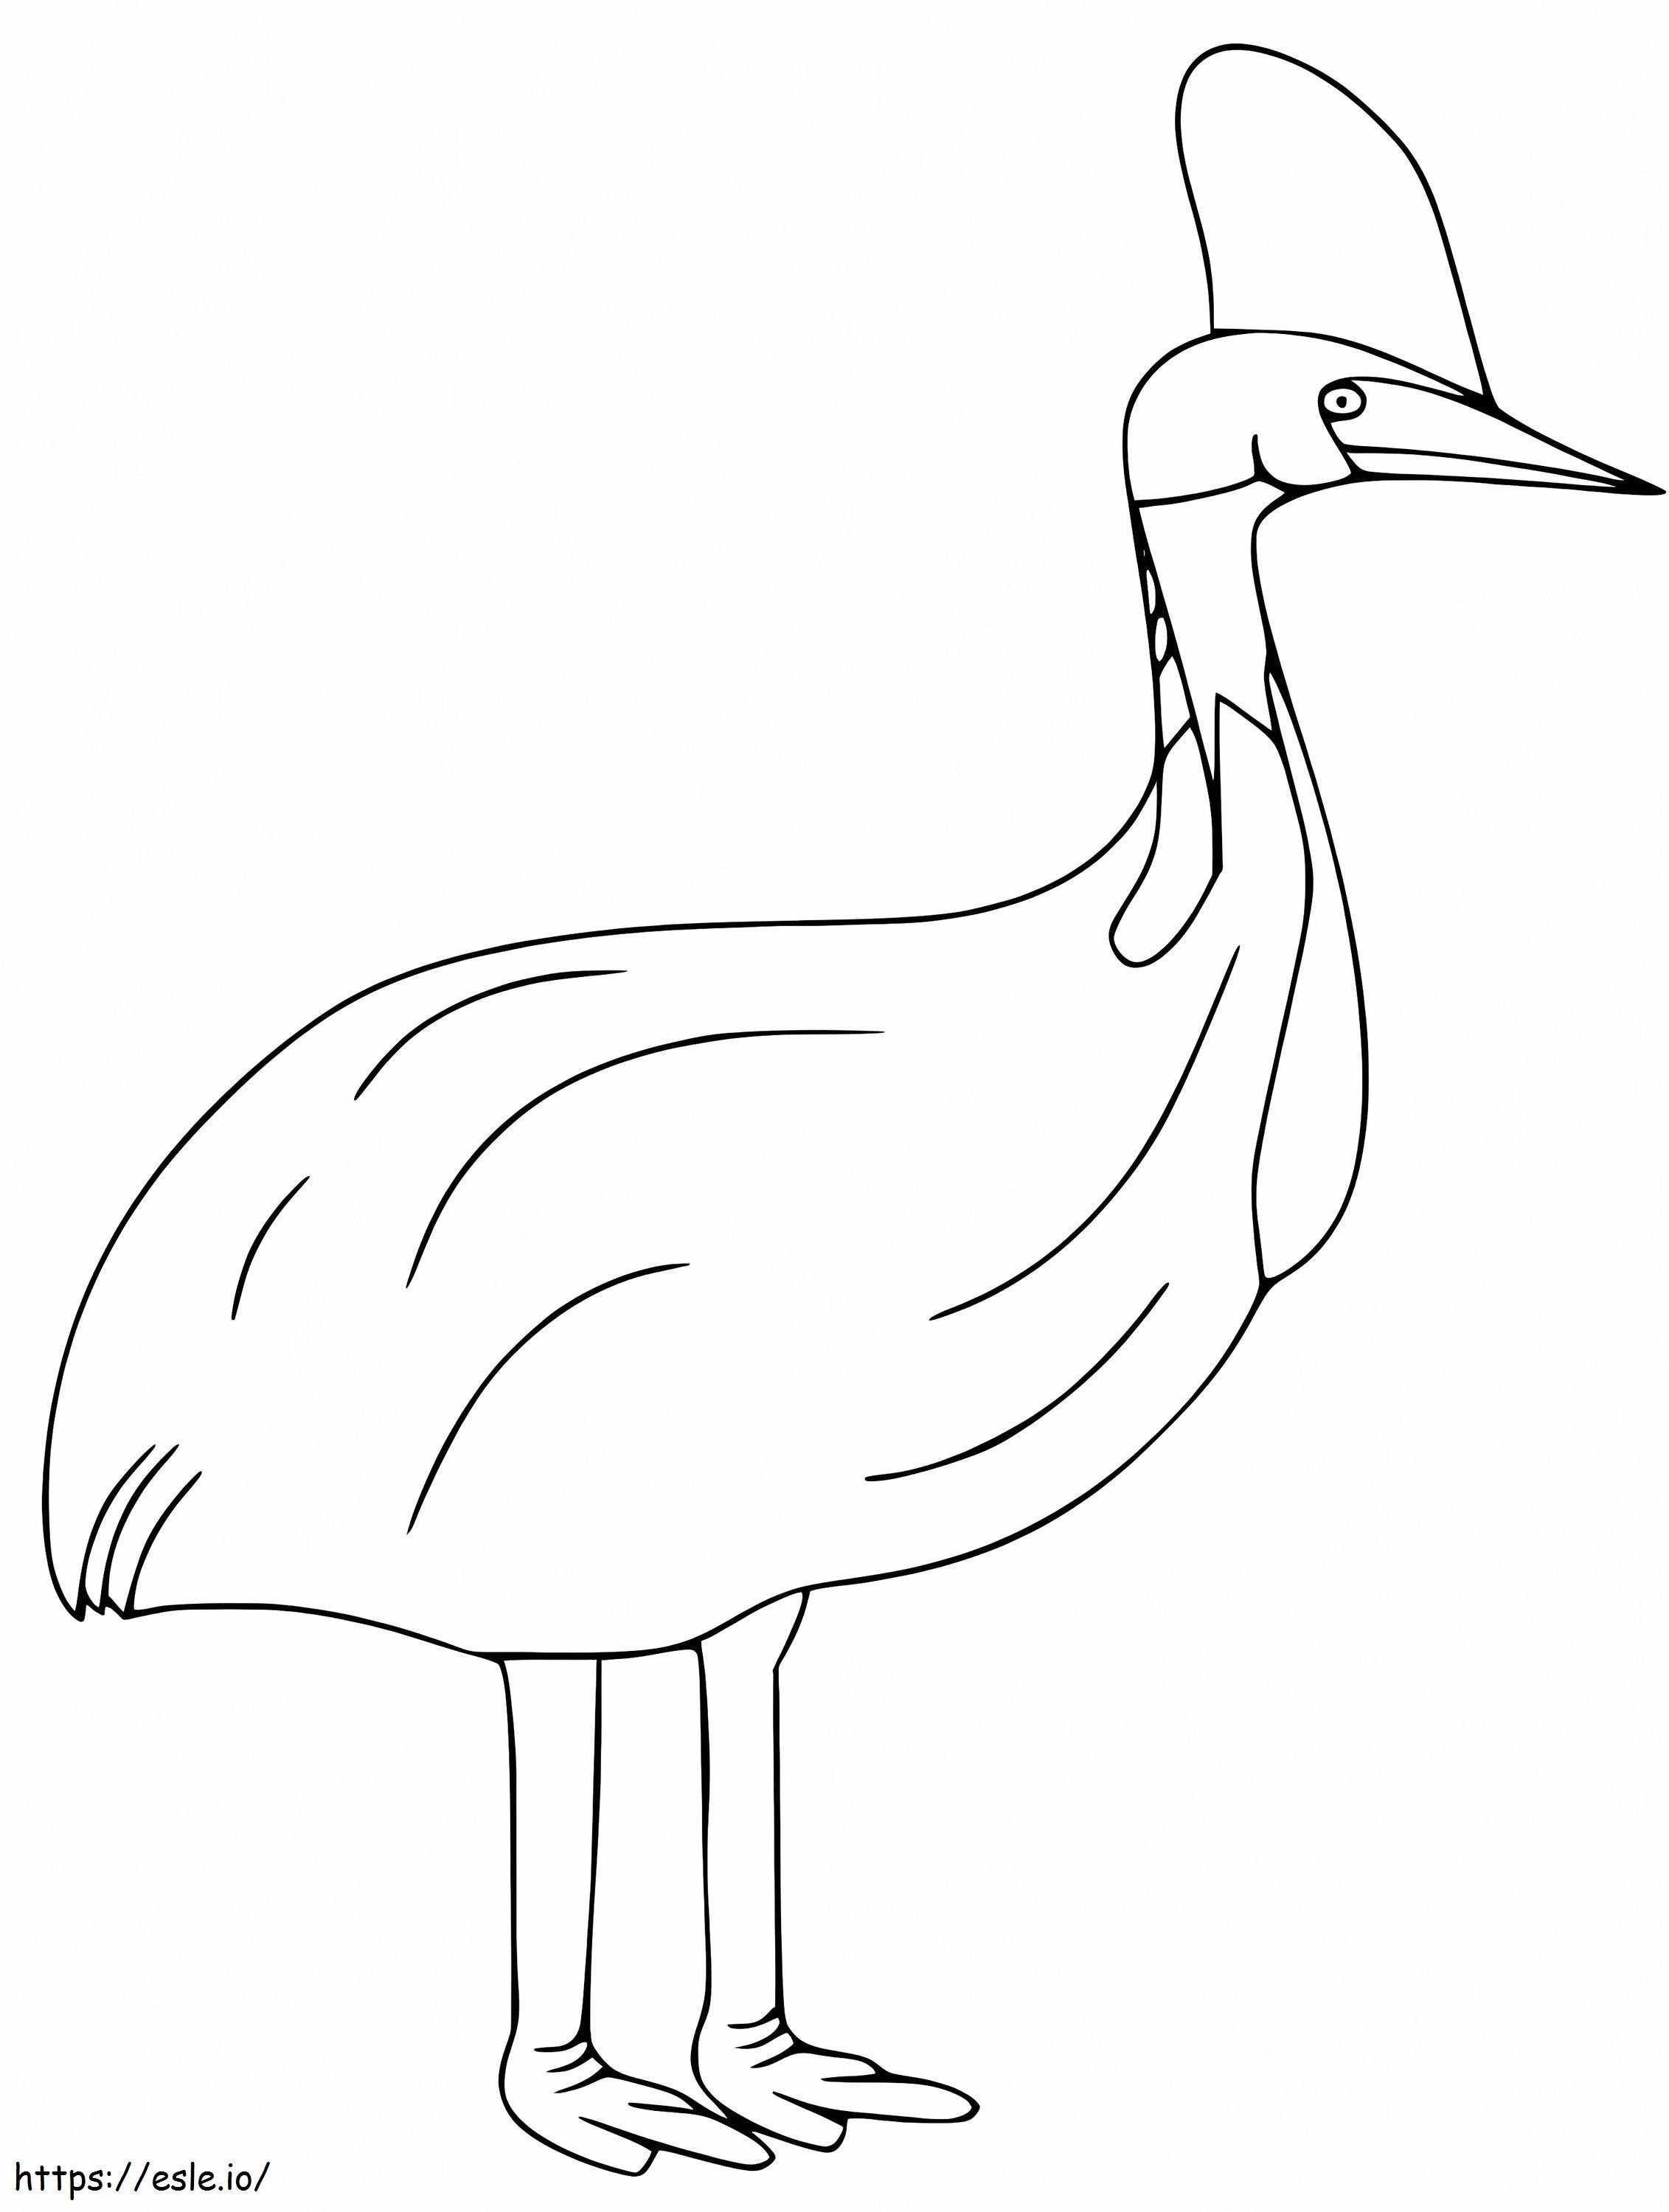 Simple Cassowary coloring page